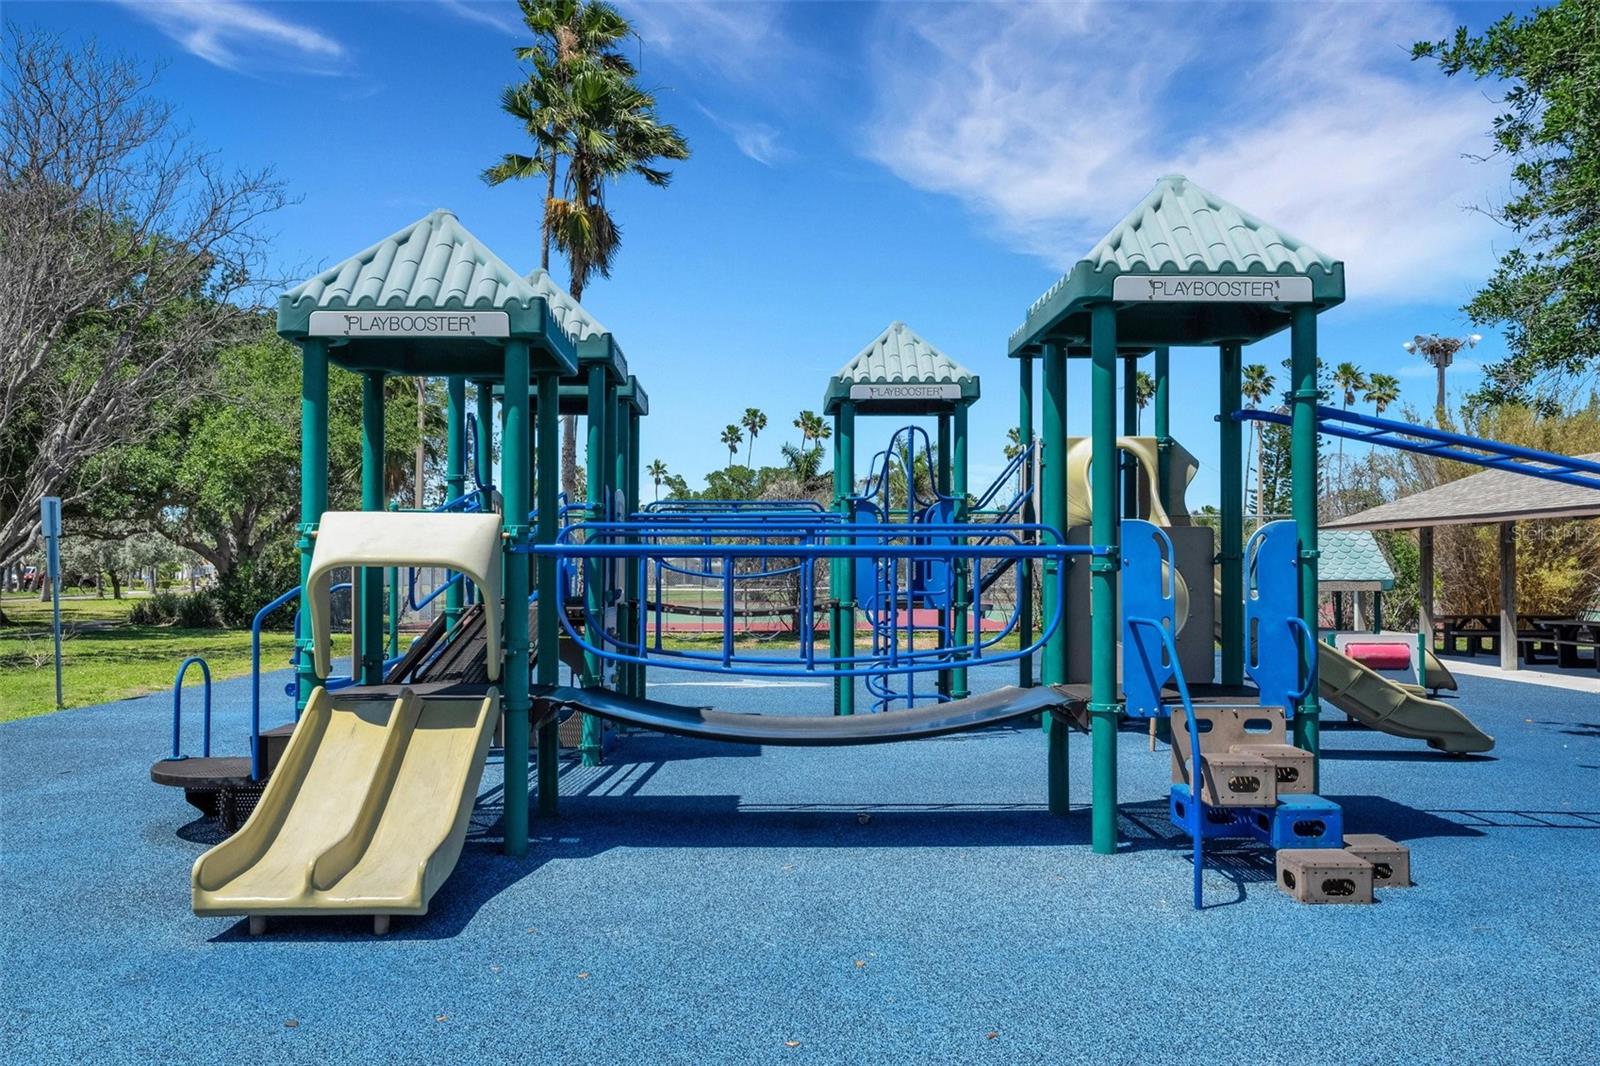 Neighborhood park and playground with rubberized flooring